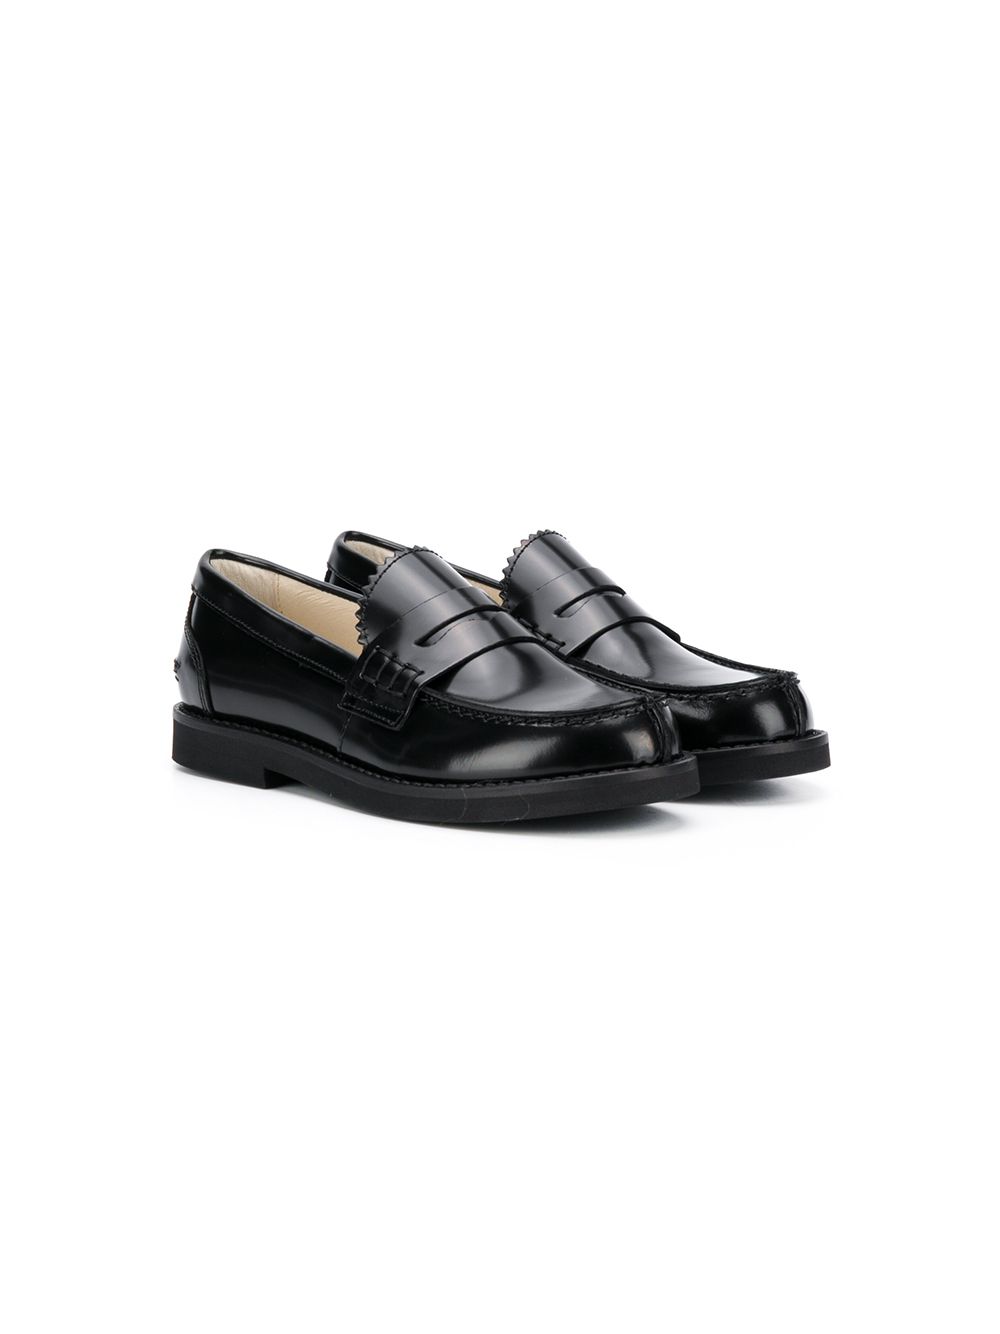 MONTELPARE TRADITION JASPER PENNY LOAFERS